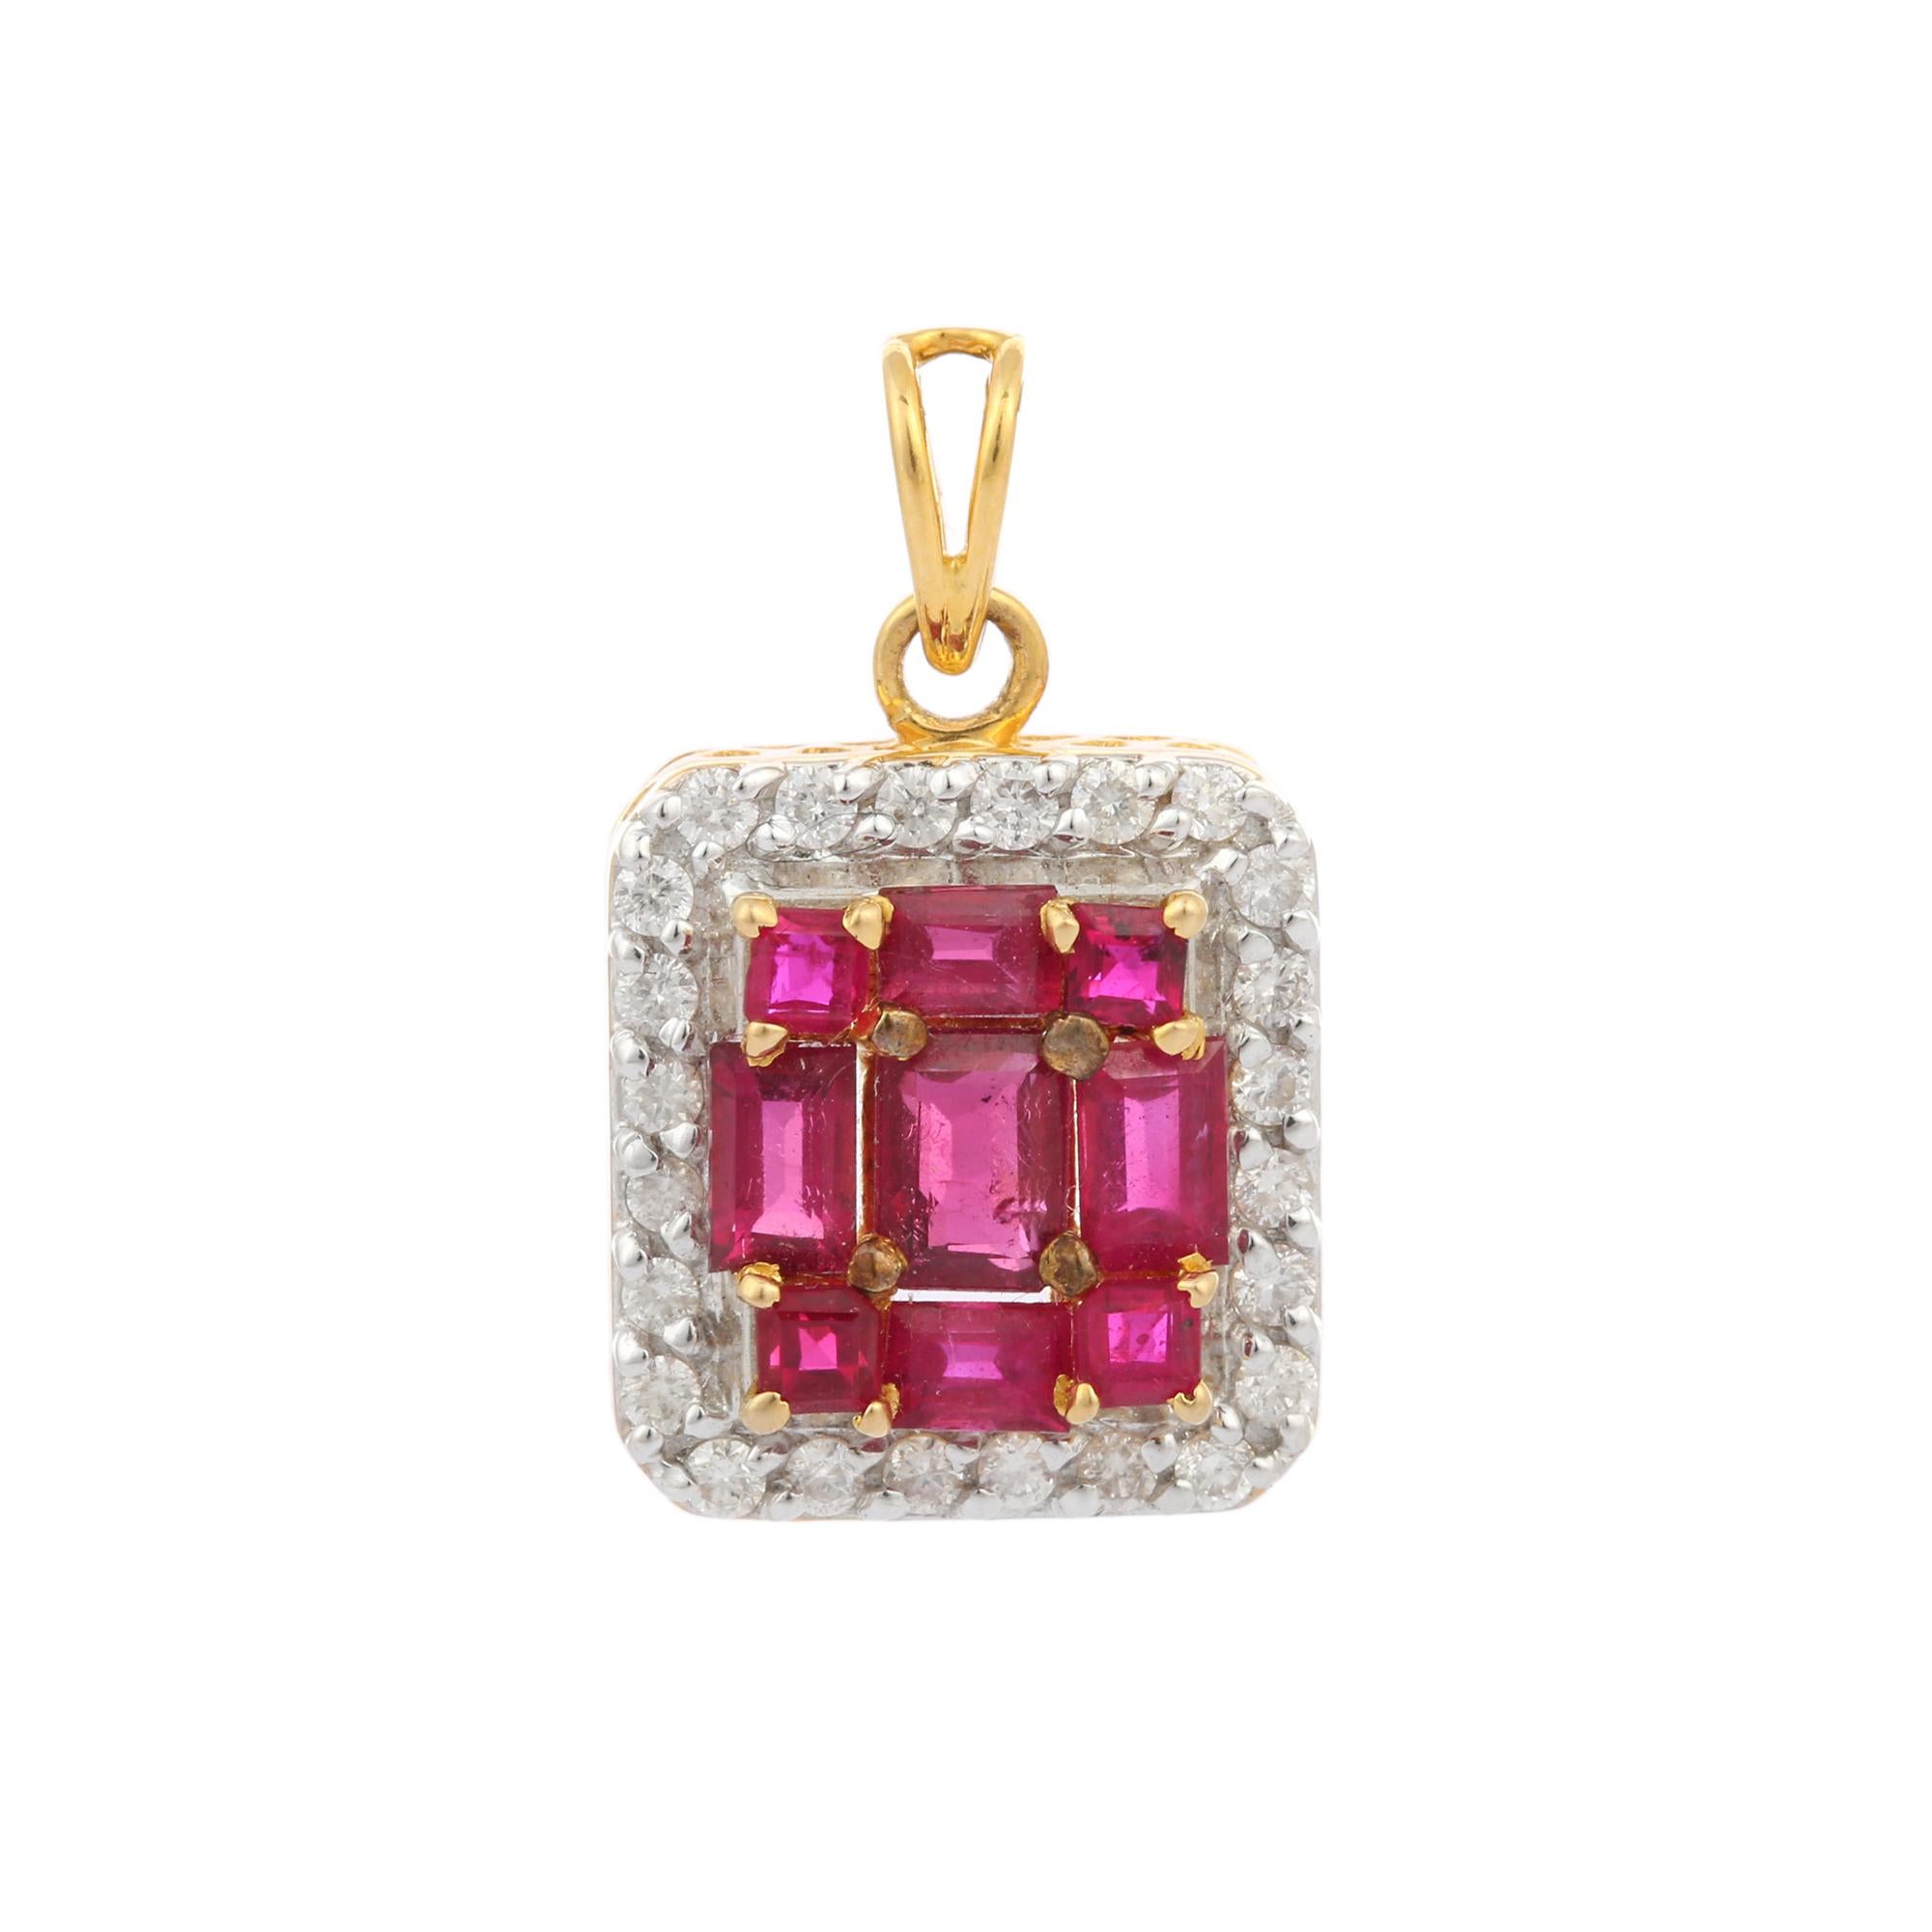 Cluster ruby diamond halo pendant in 18K Gold. It has a octagon and square cut ruby with halo diamonds that completes your look with a decent touch. Pendants are used to wear or gifted to represent love and promises. It's an attractive jewelry piece